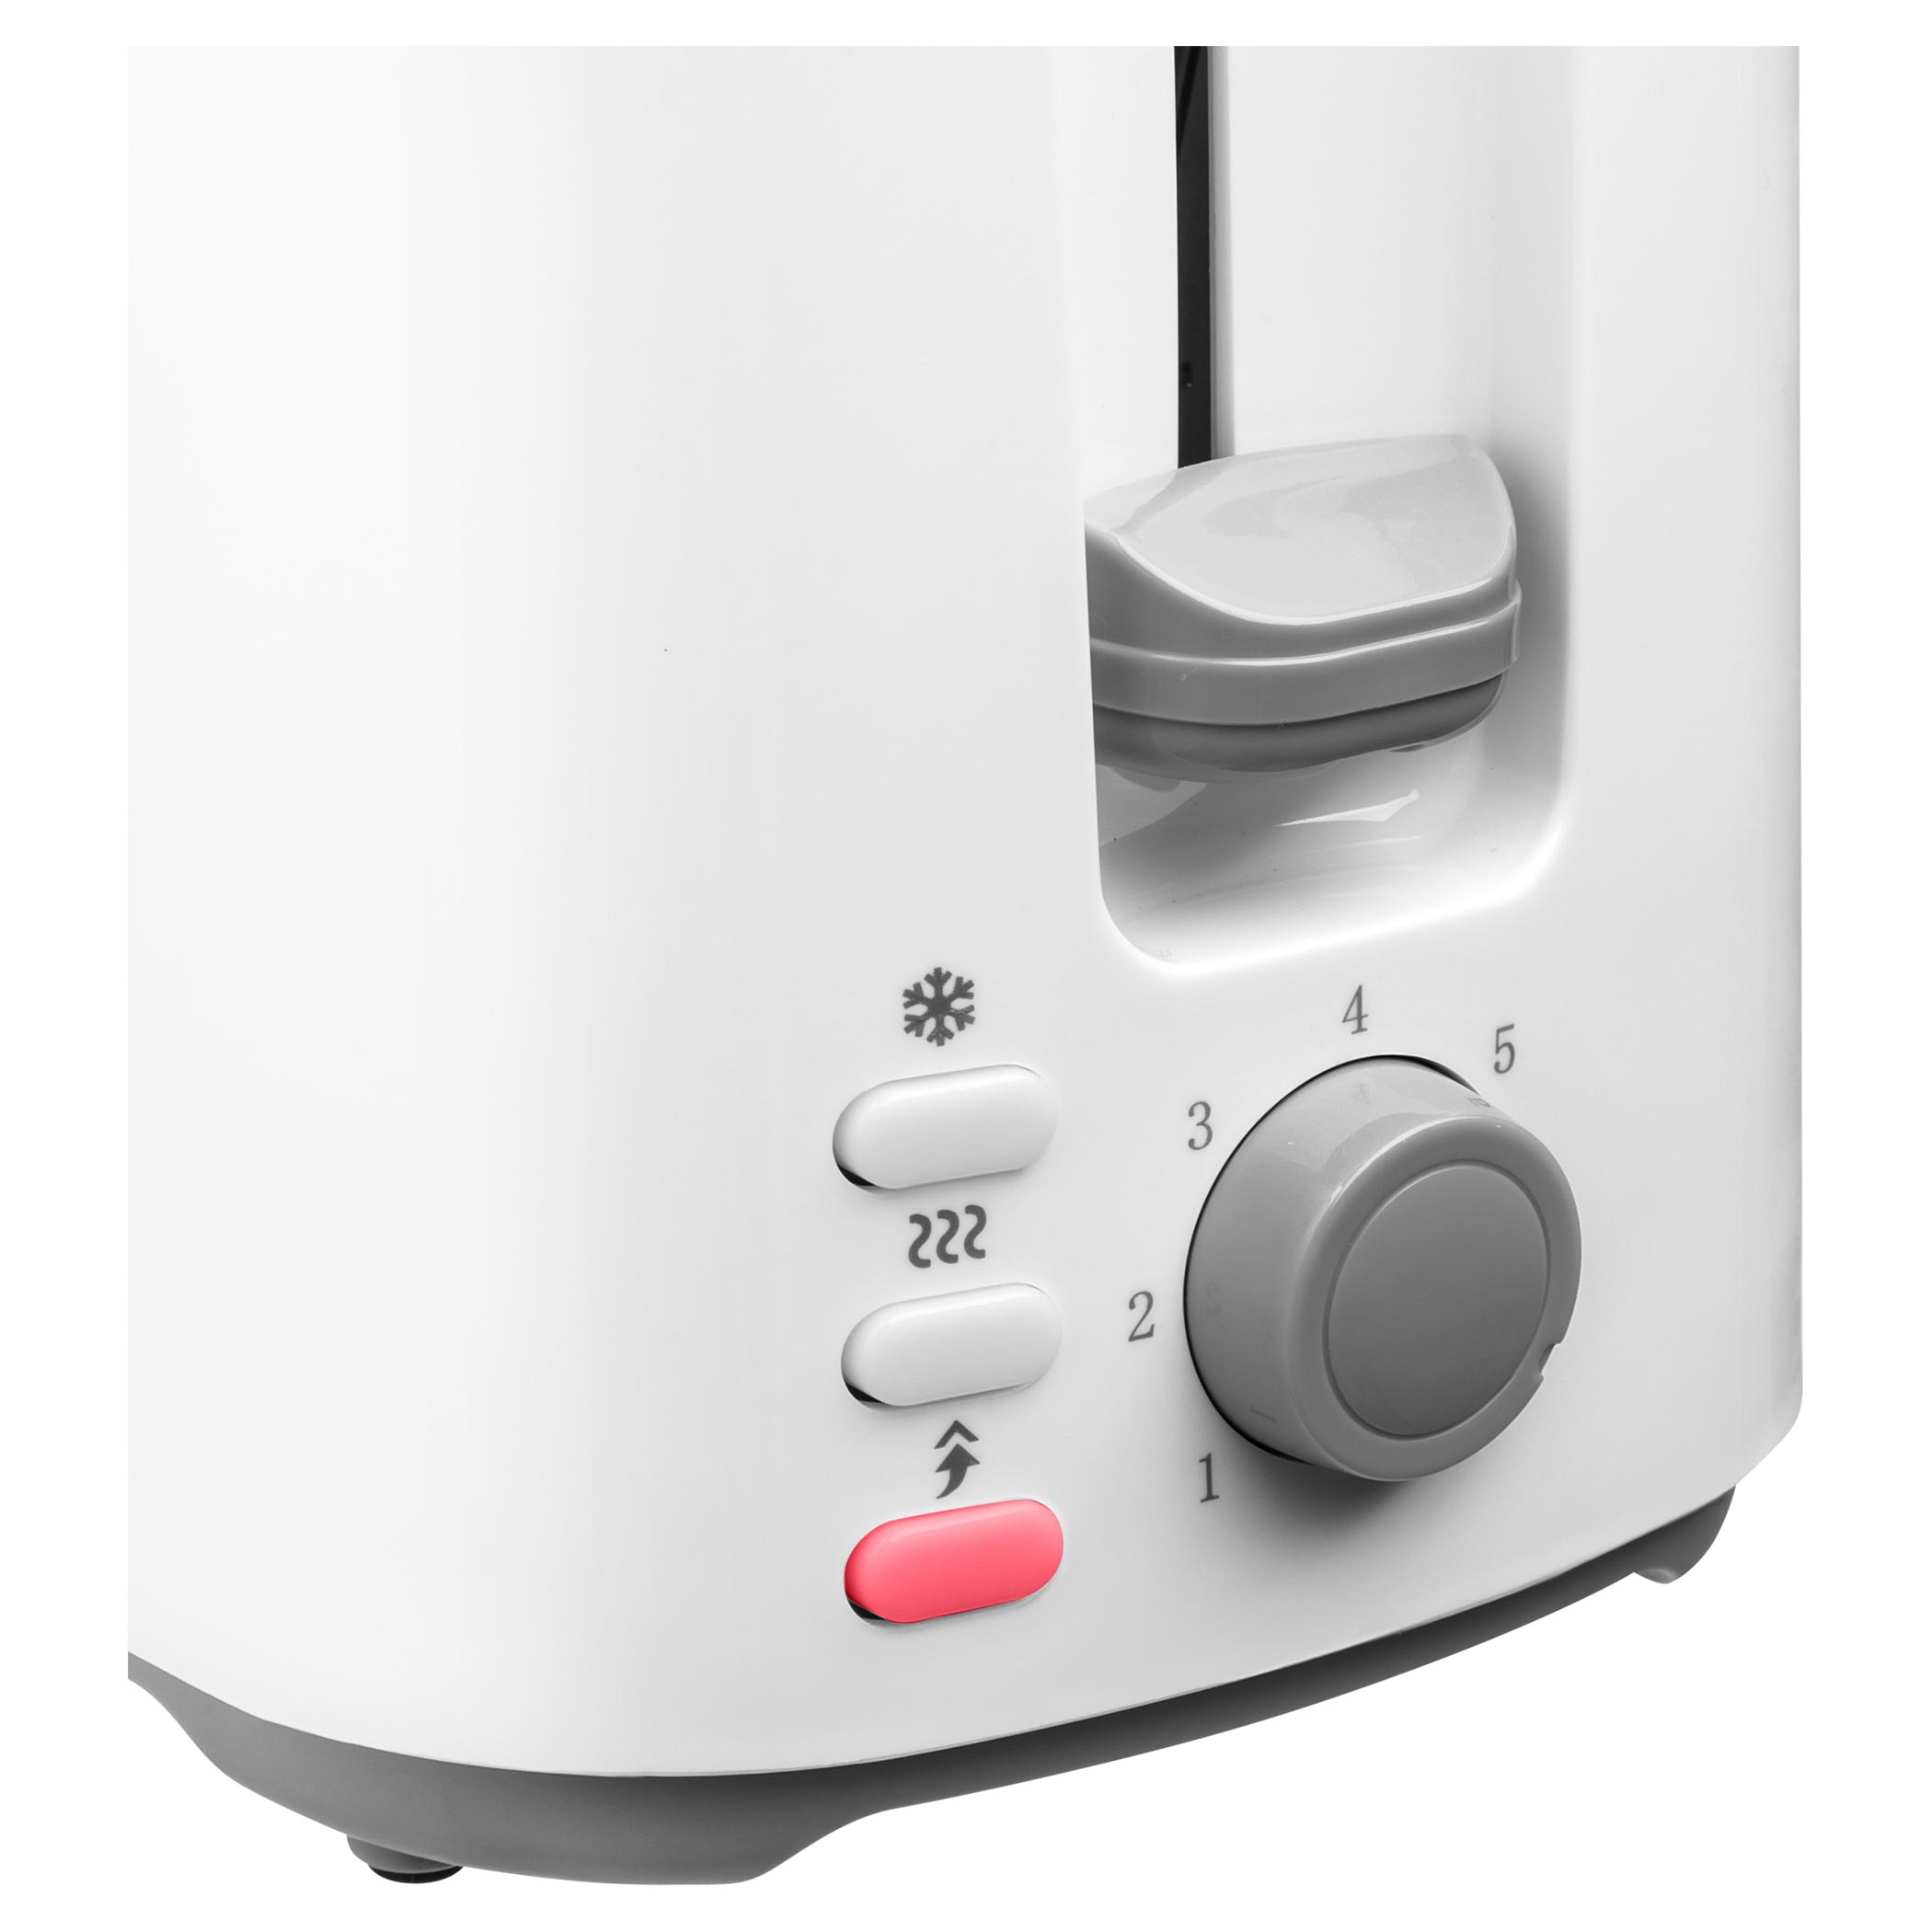 Electric Toaster, STS 6051GR